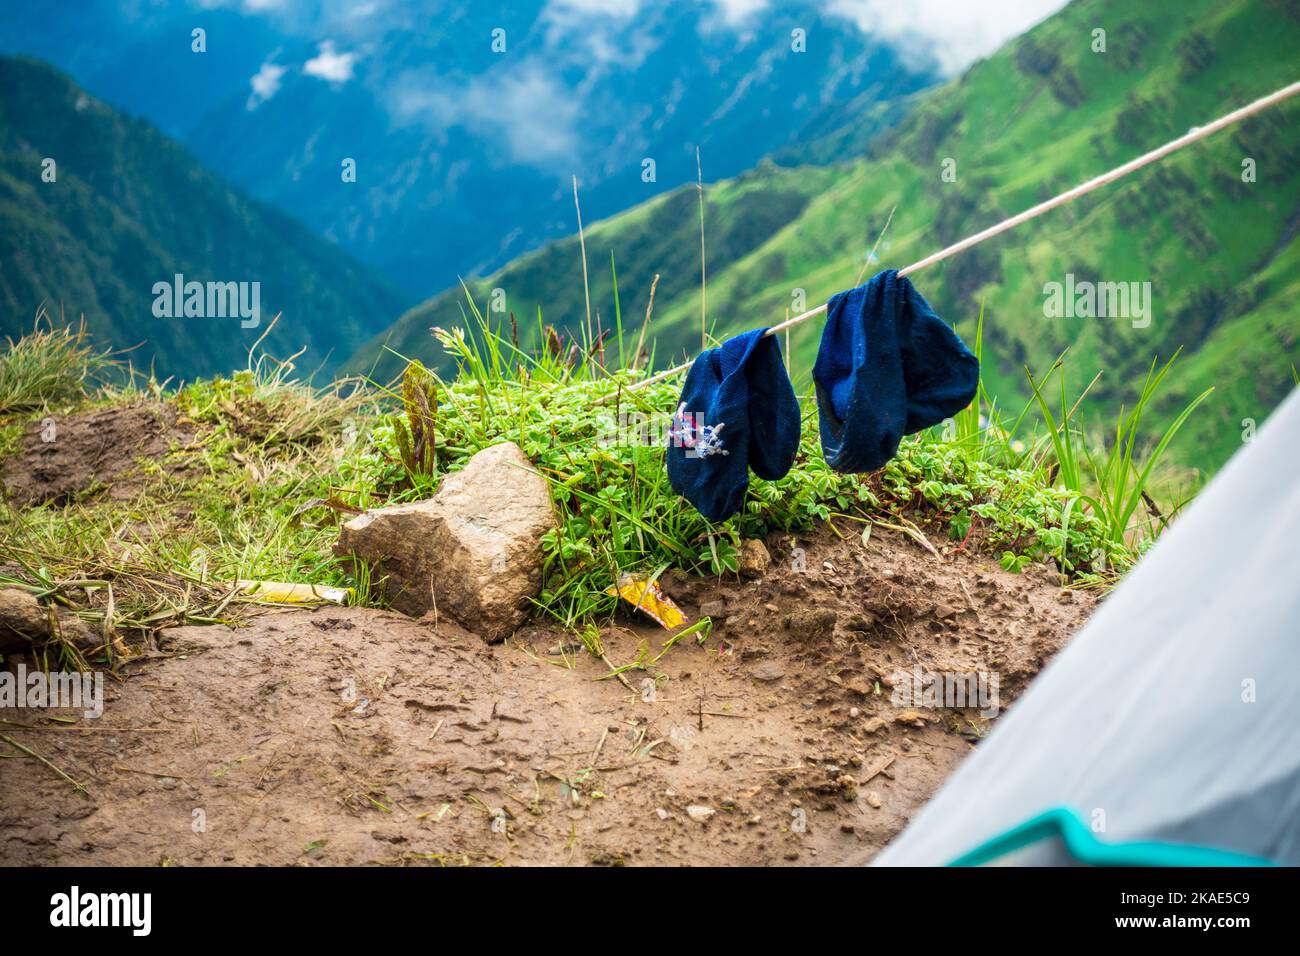 July 14th 2022, Himachal Pradesh India. Pair of trekking socks drying on a wire after a long day trek with landscapes and sky in the background. Stock Photo